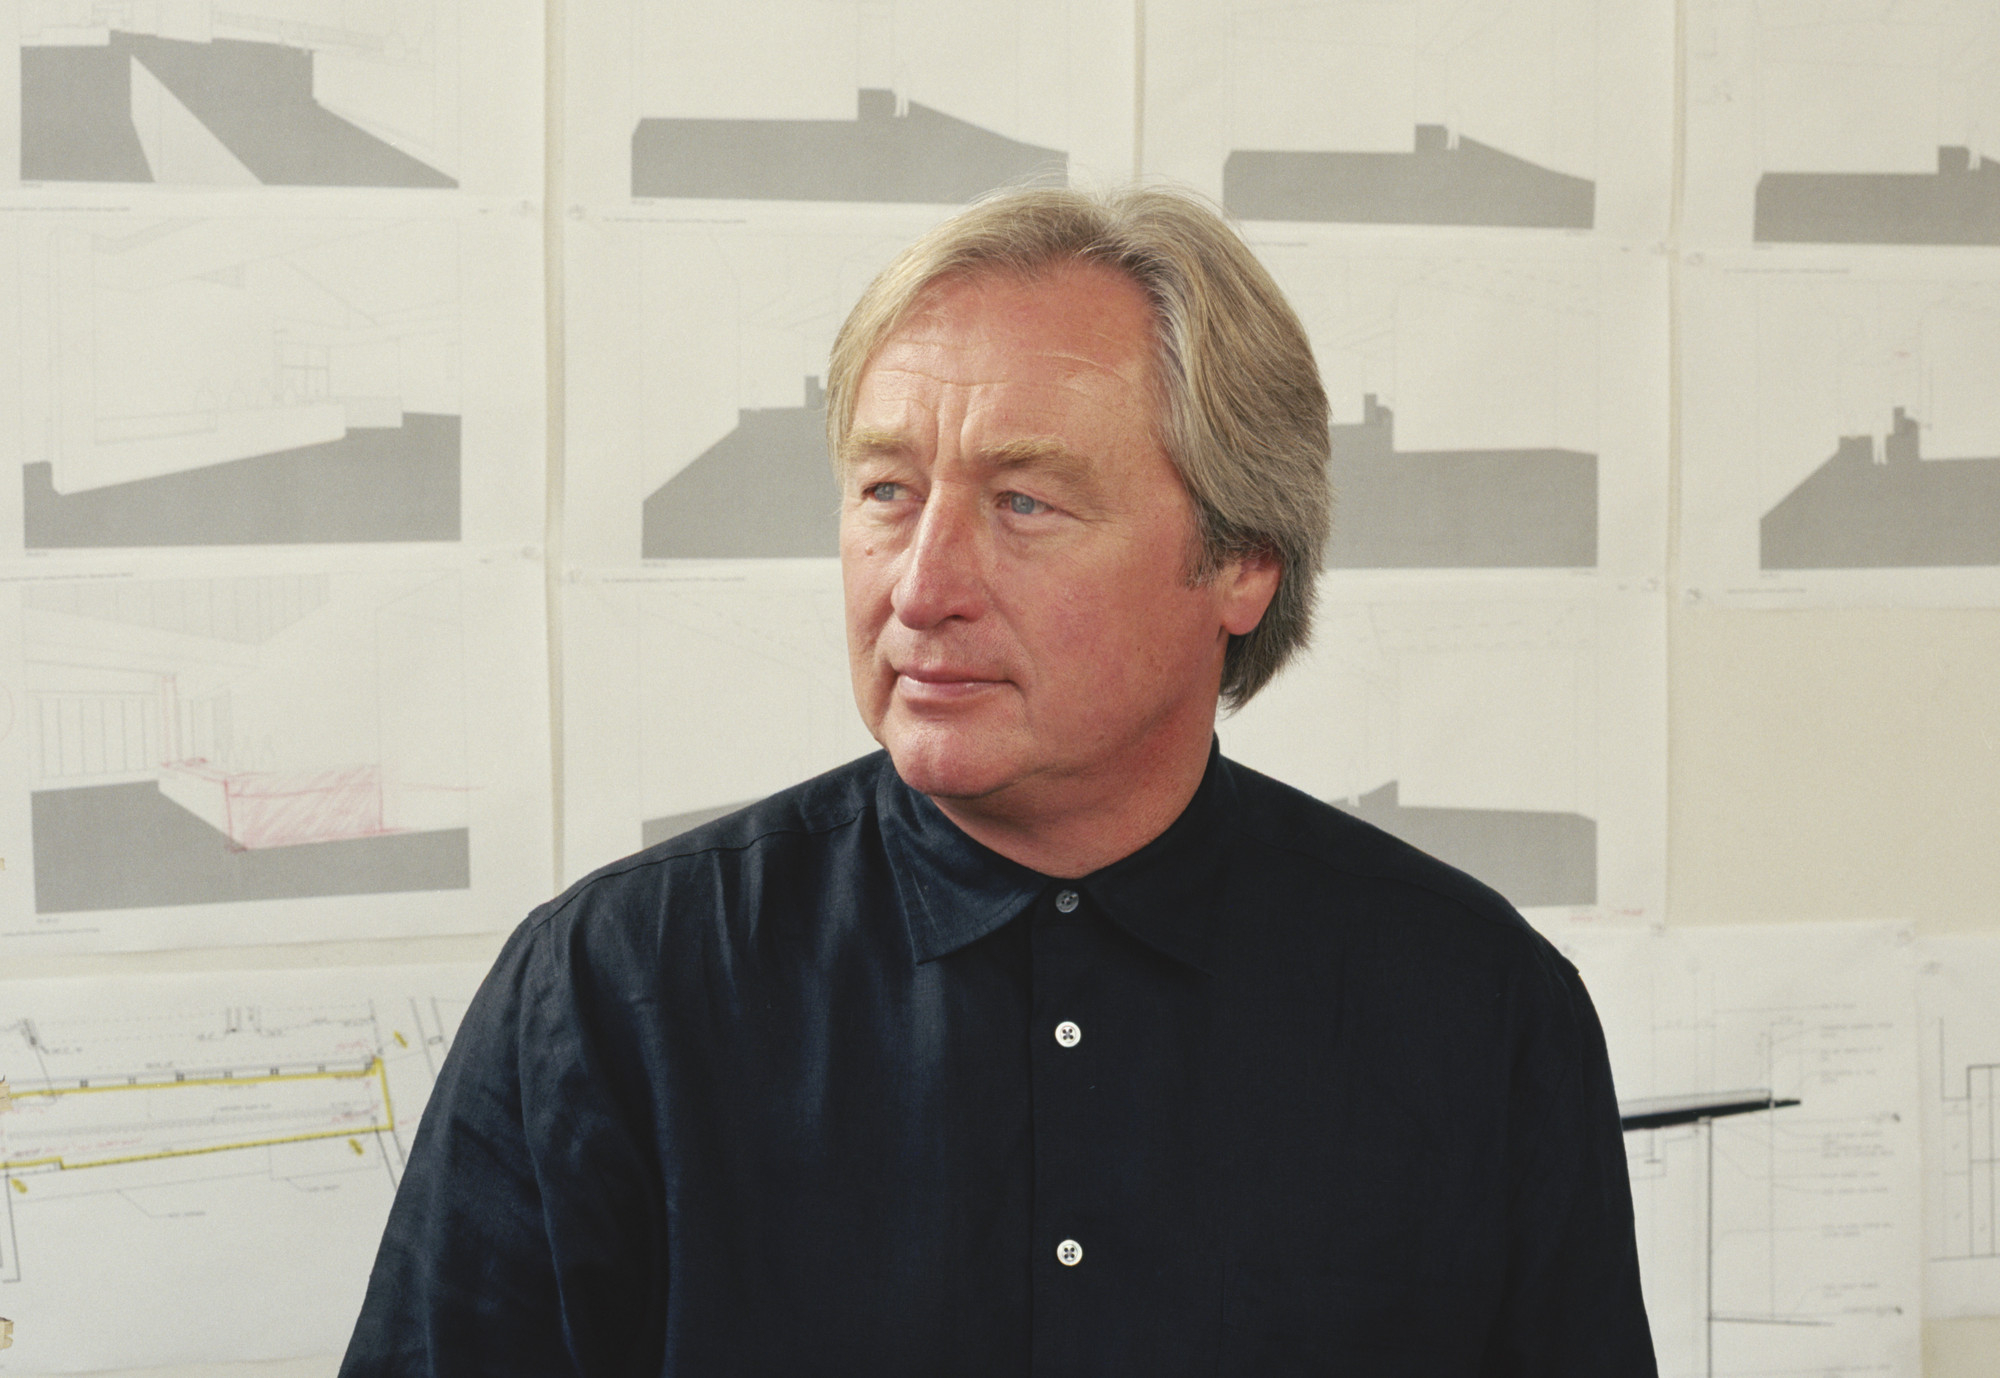 Steven Holl, Photo by Mark Heithoff